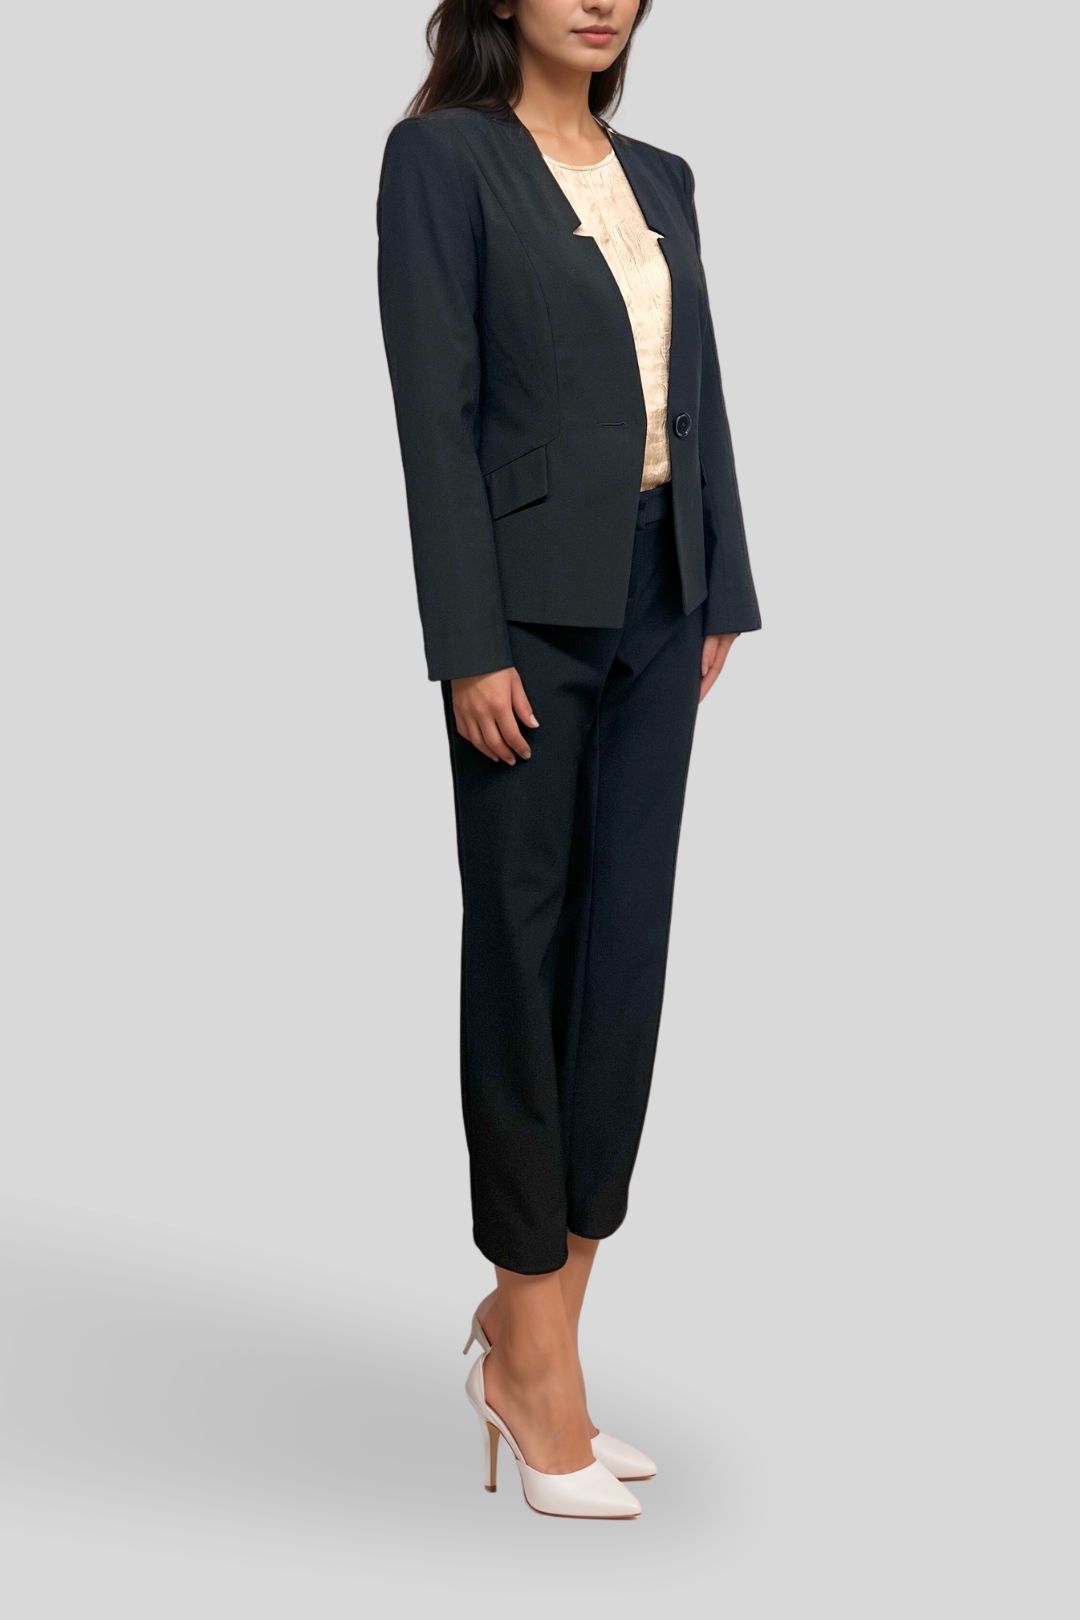 Dress Hire casual Veronika Maine - Fitted Suit Jacket